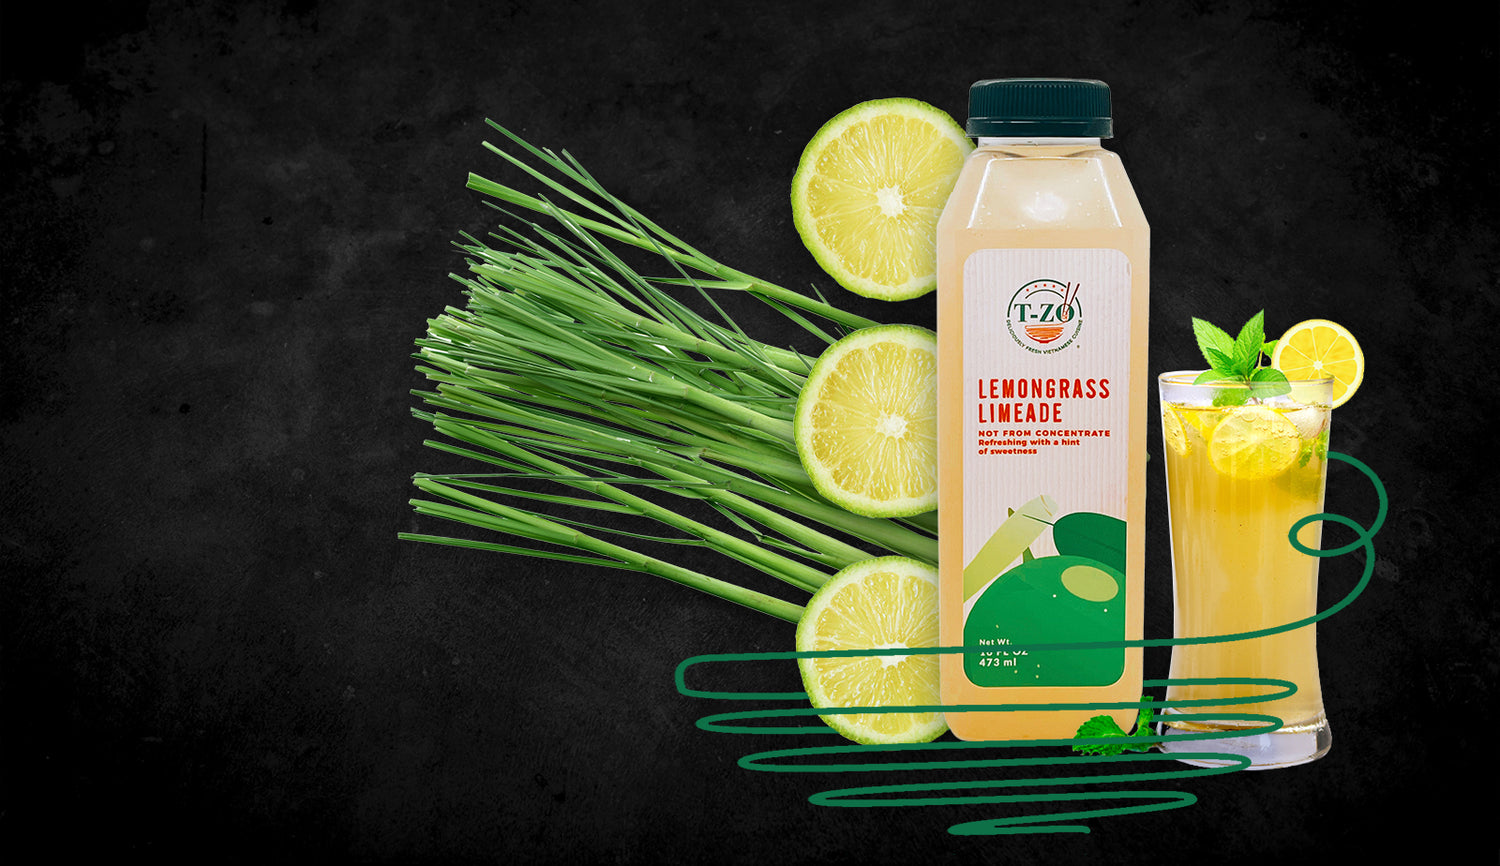 T-ZO's refreshing Lemongrass Limeade, this drink is made from fresh lime juice, no artificial flavors. All T-ZO beverages are made from made from fresh and natural ingredients; and never used preservatives